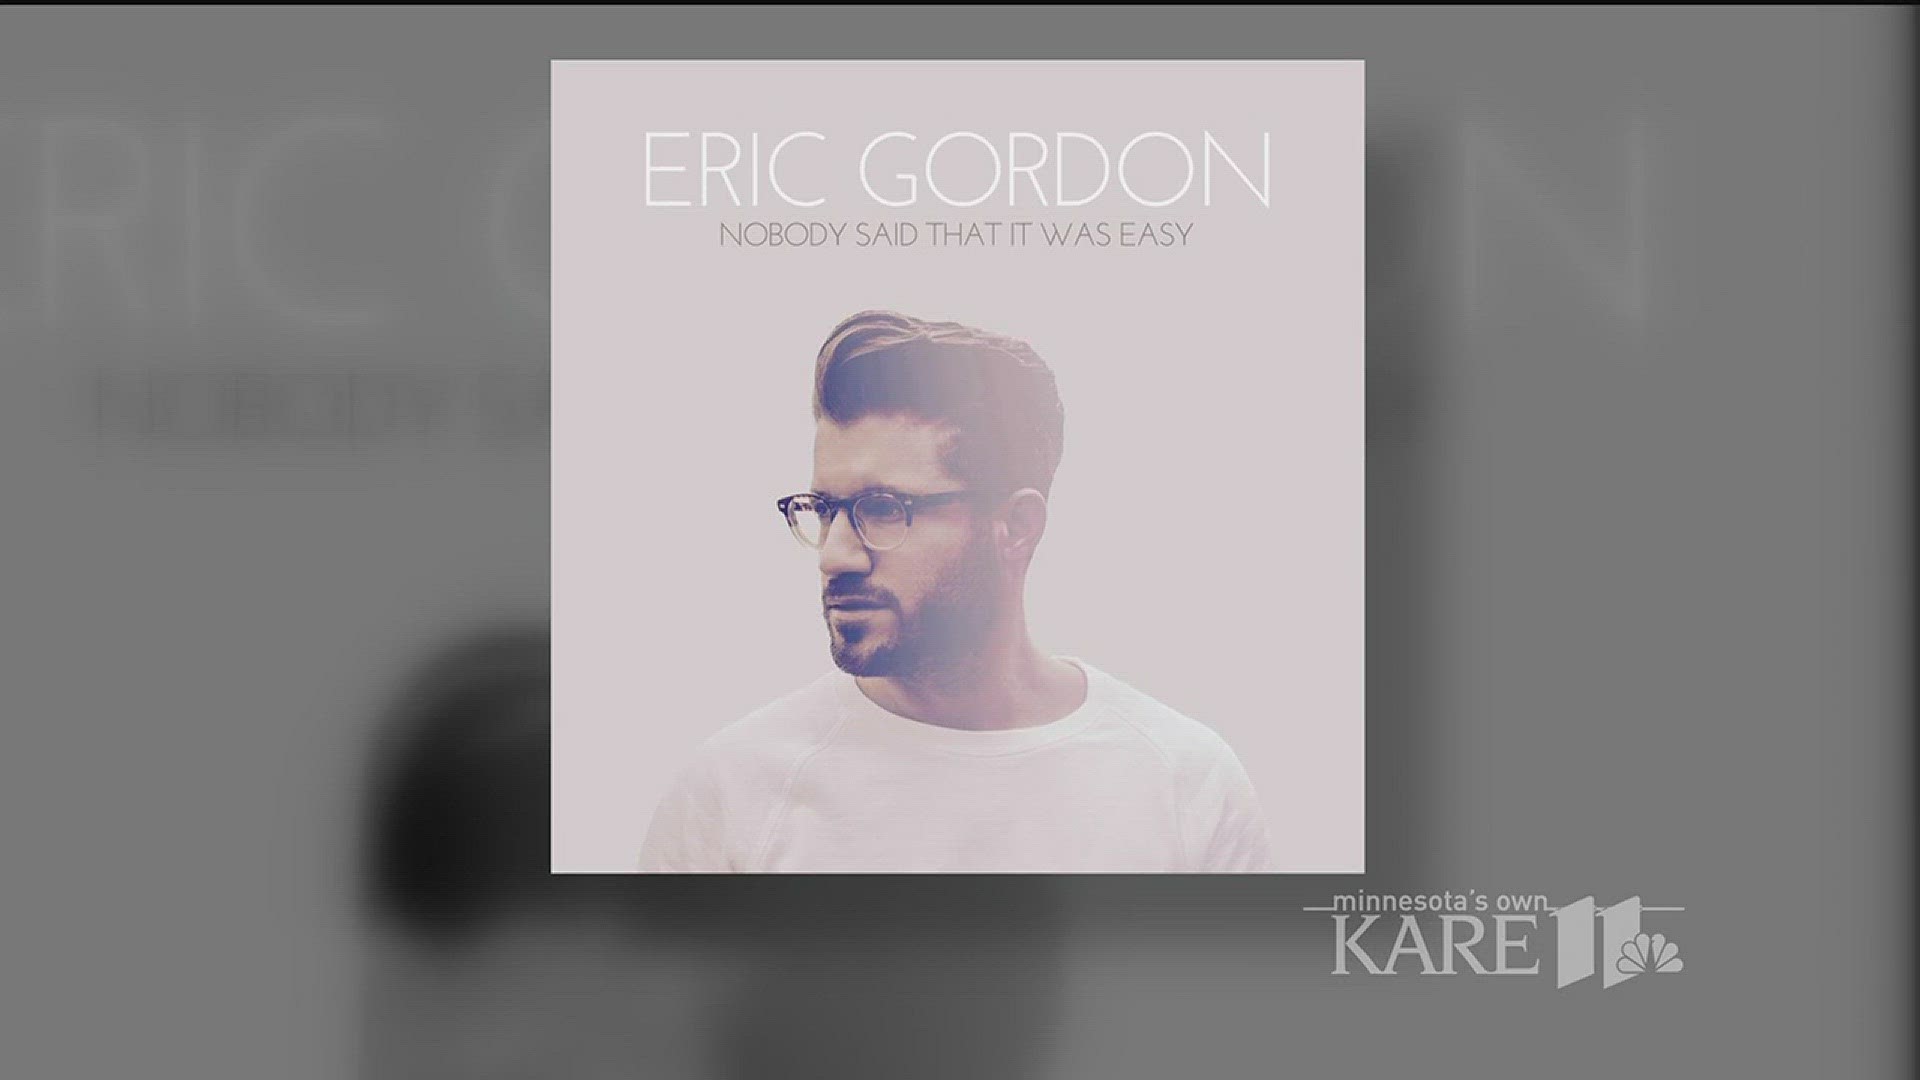 American Idol Contestant Eric Gordon talks about his newest album "Nobody Said That It Was Easy".